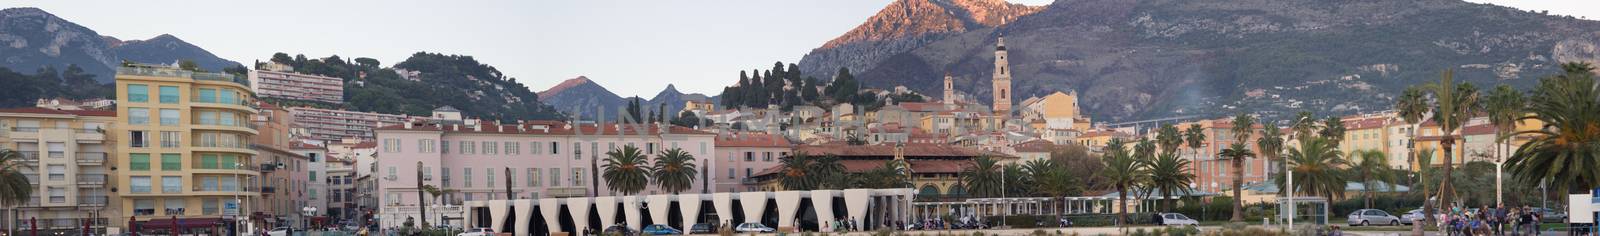 Panoramic View of Menton in France by bensib